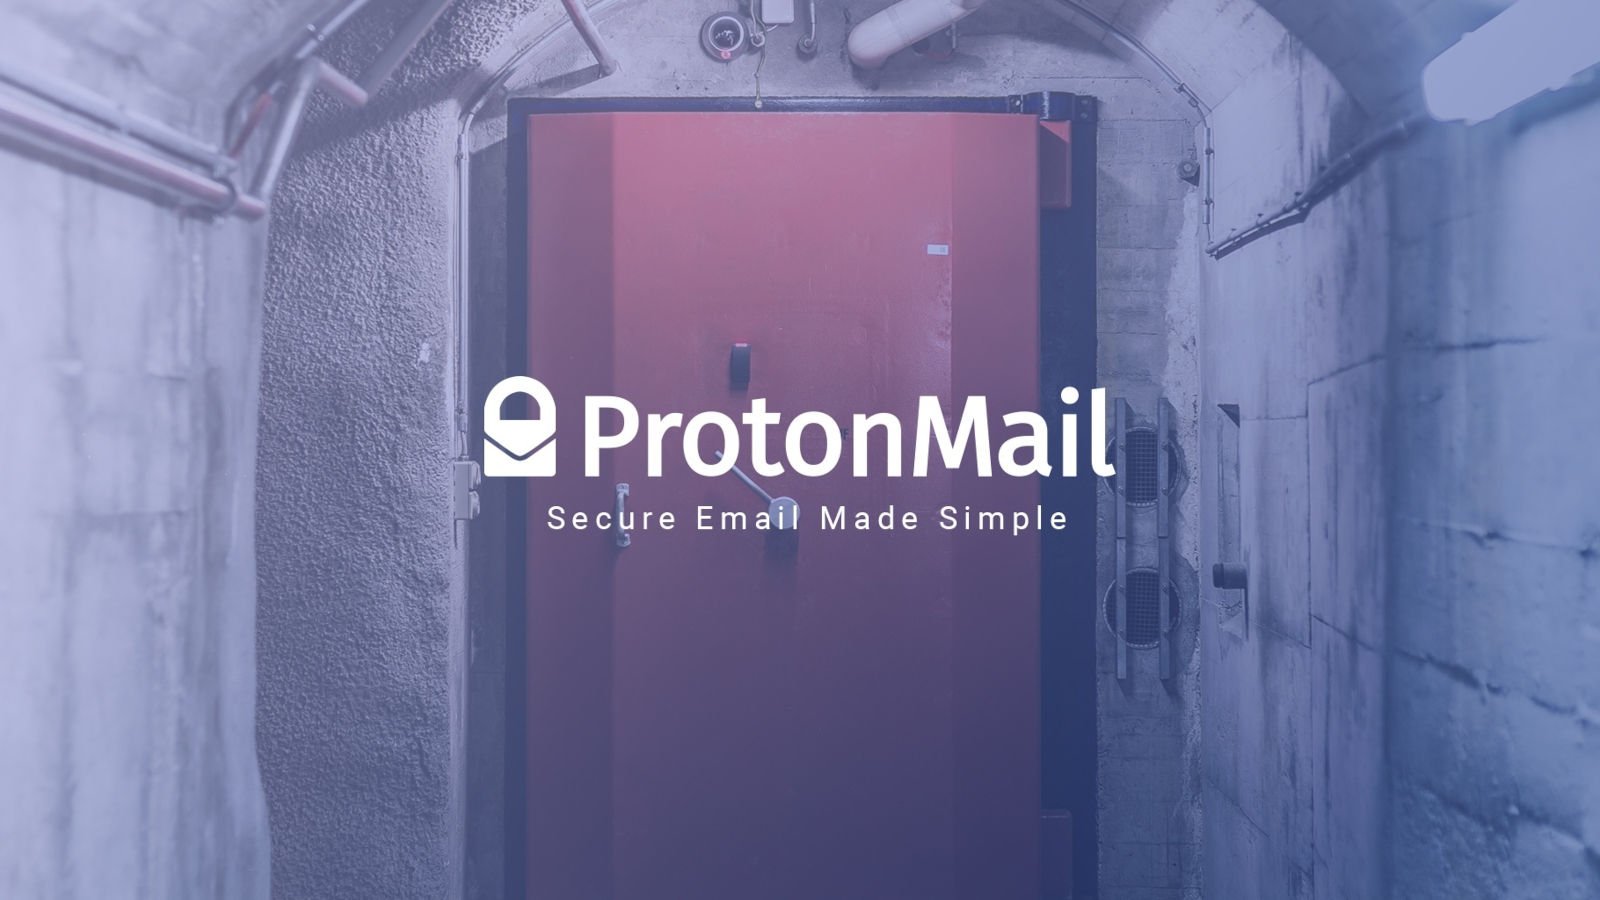 Protonmail logo overlaid on top of a vault